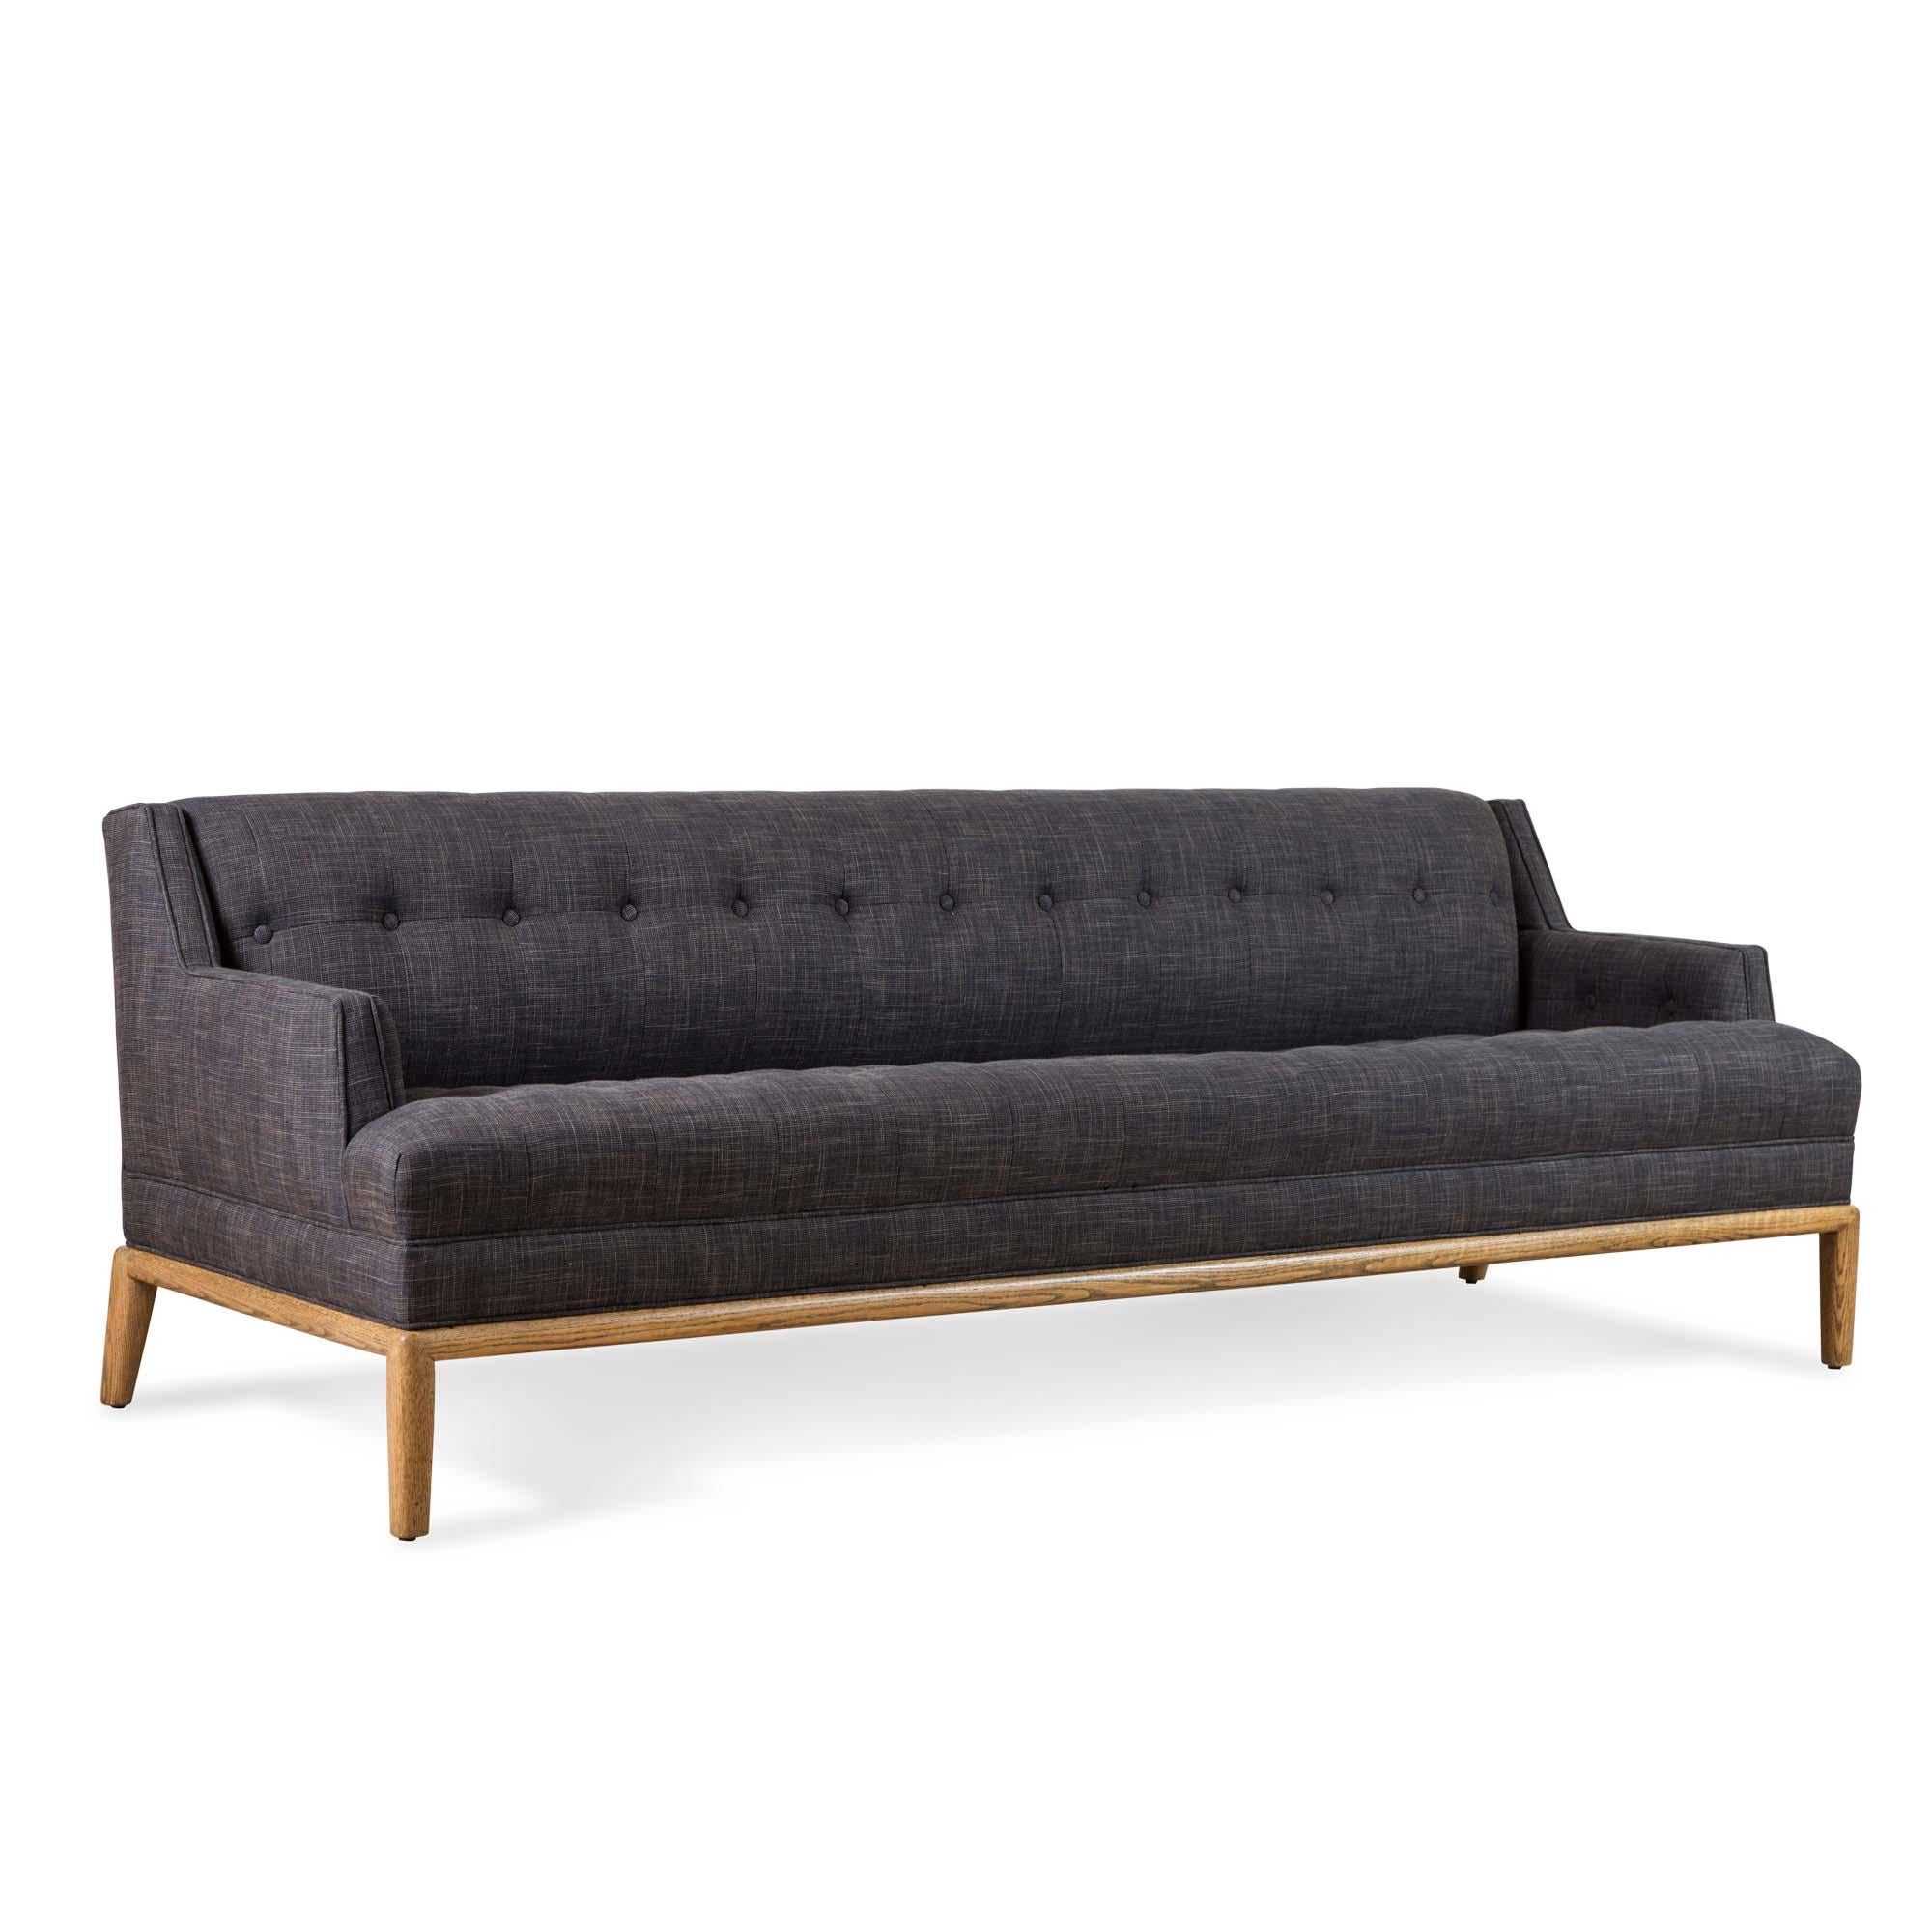 The Maurice sofa is a midcentury inspired sofa with a tufted seat, back, and inner arms and piped details. The sofa rests atop a simple, rounded American walnut or white oak base. 

The Lawson-Fenning collection is designed and handmade in Los